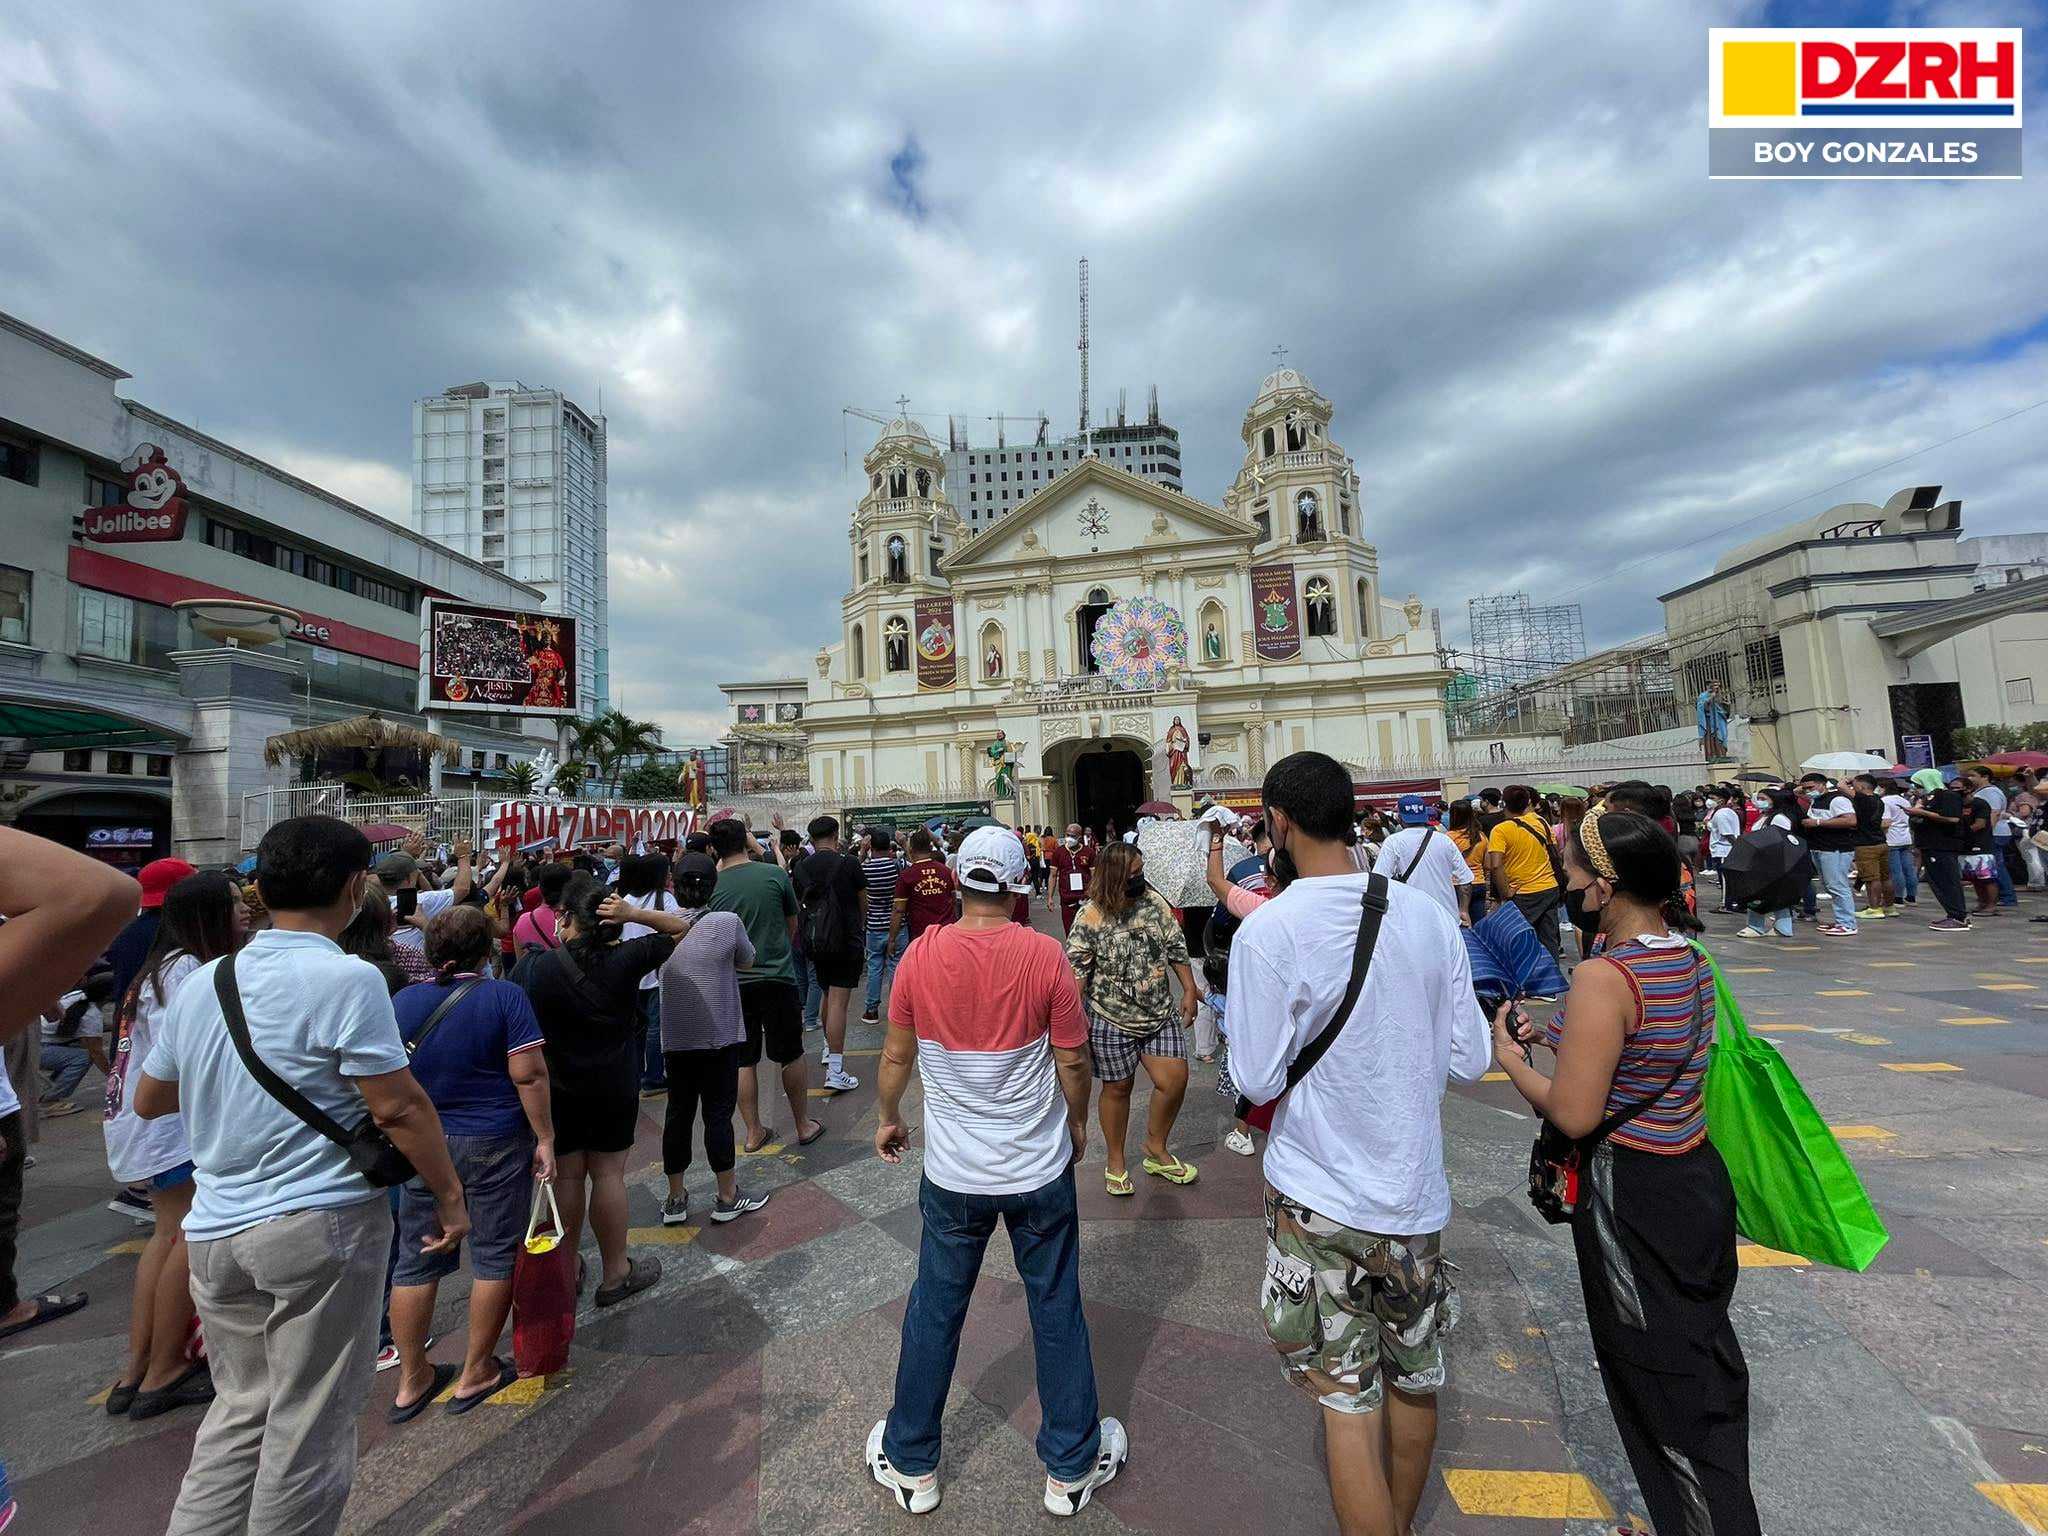 OTS seizes balisong, bala, other illegal items in Quiapo Church